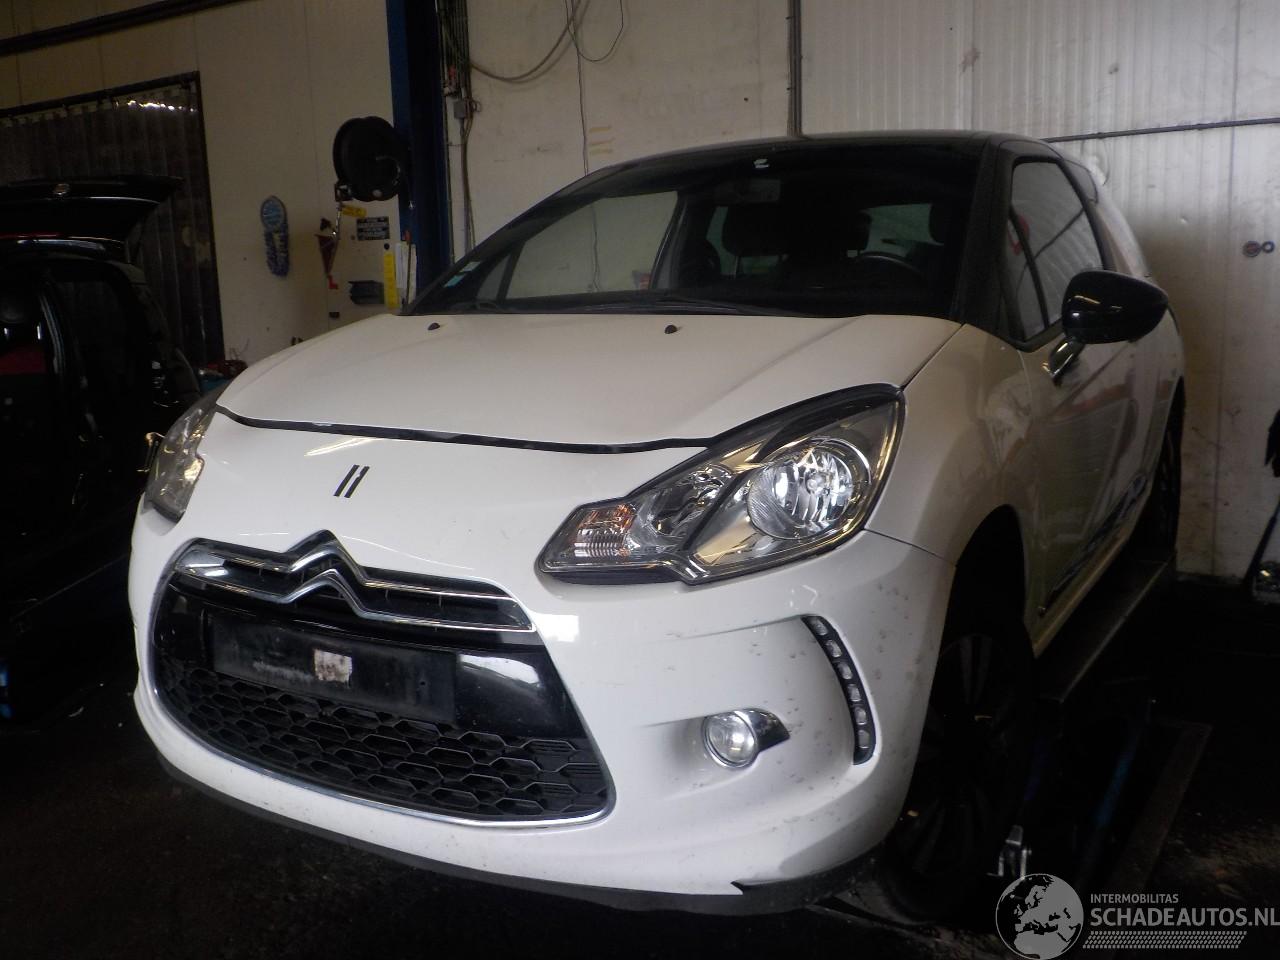 Citroën DS3 DS3 (SA) Hatchback 1.6 e-HDi (DV6DTED(9HP)) [68kW]  (11-2009/07-2015)